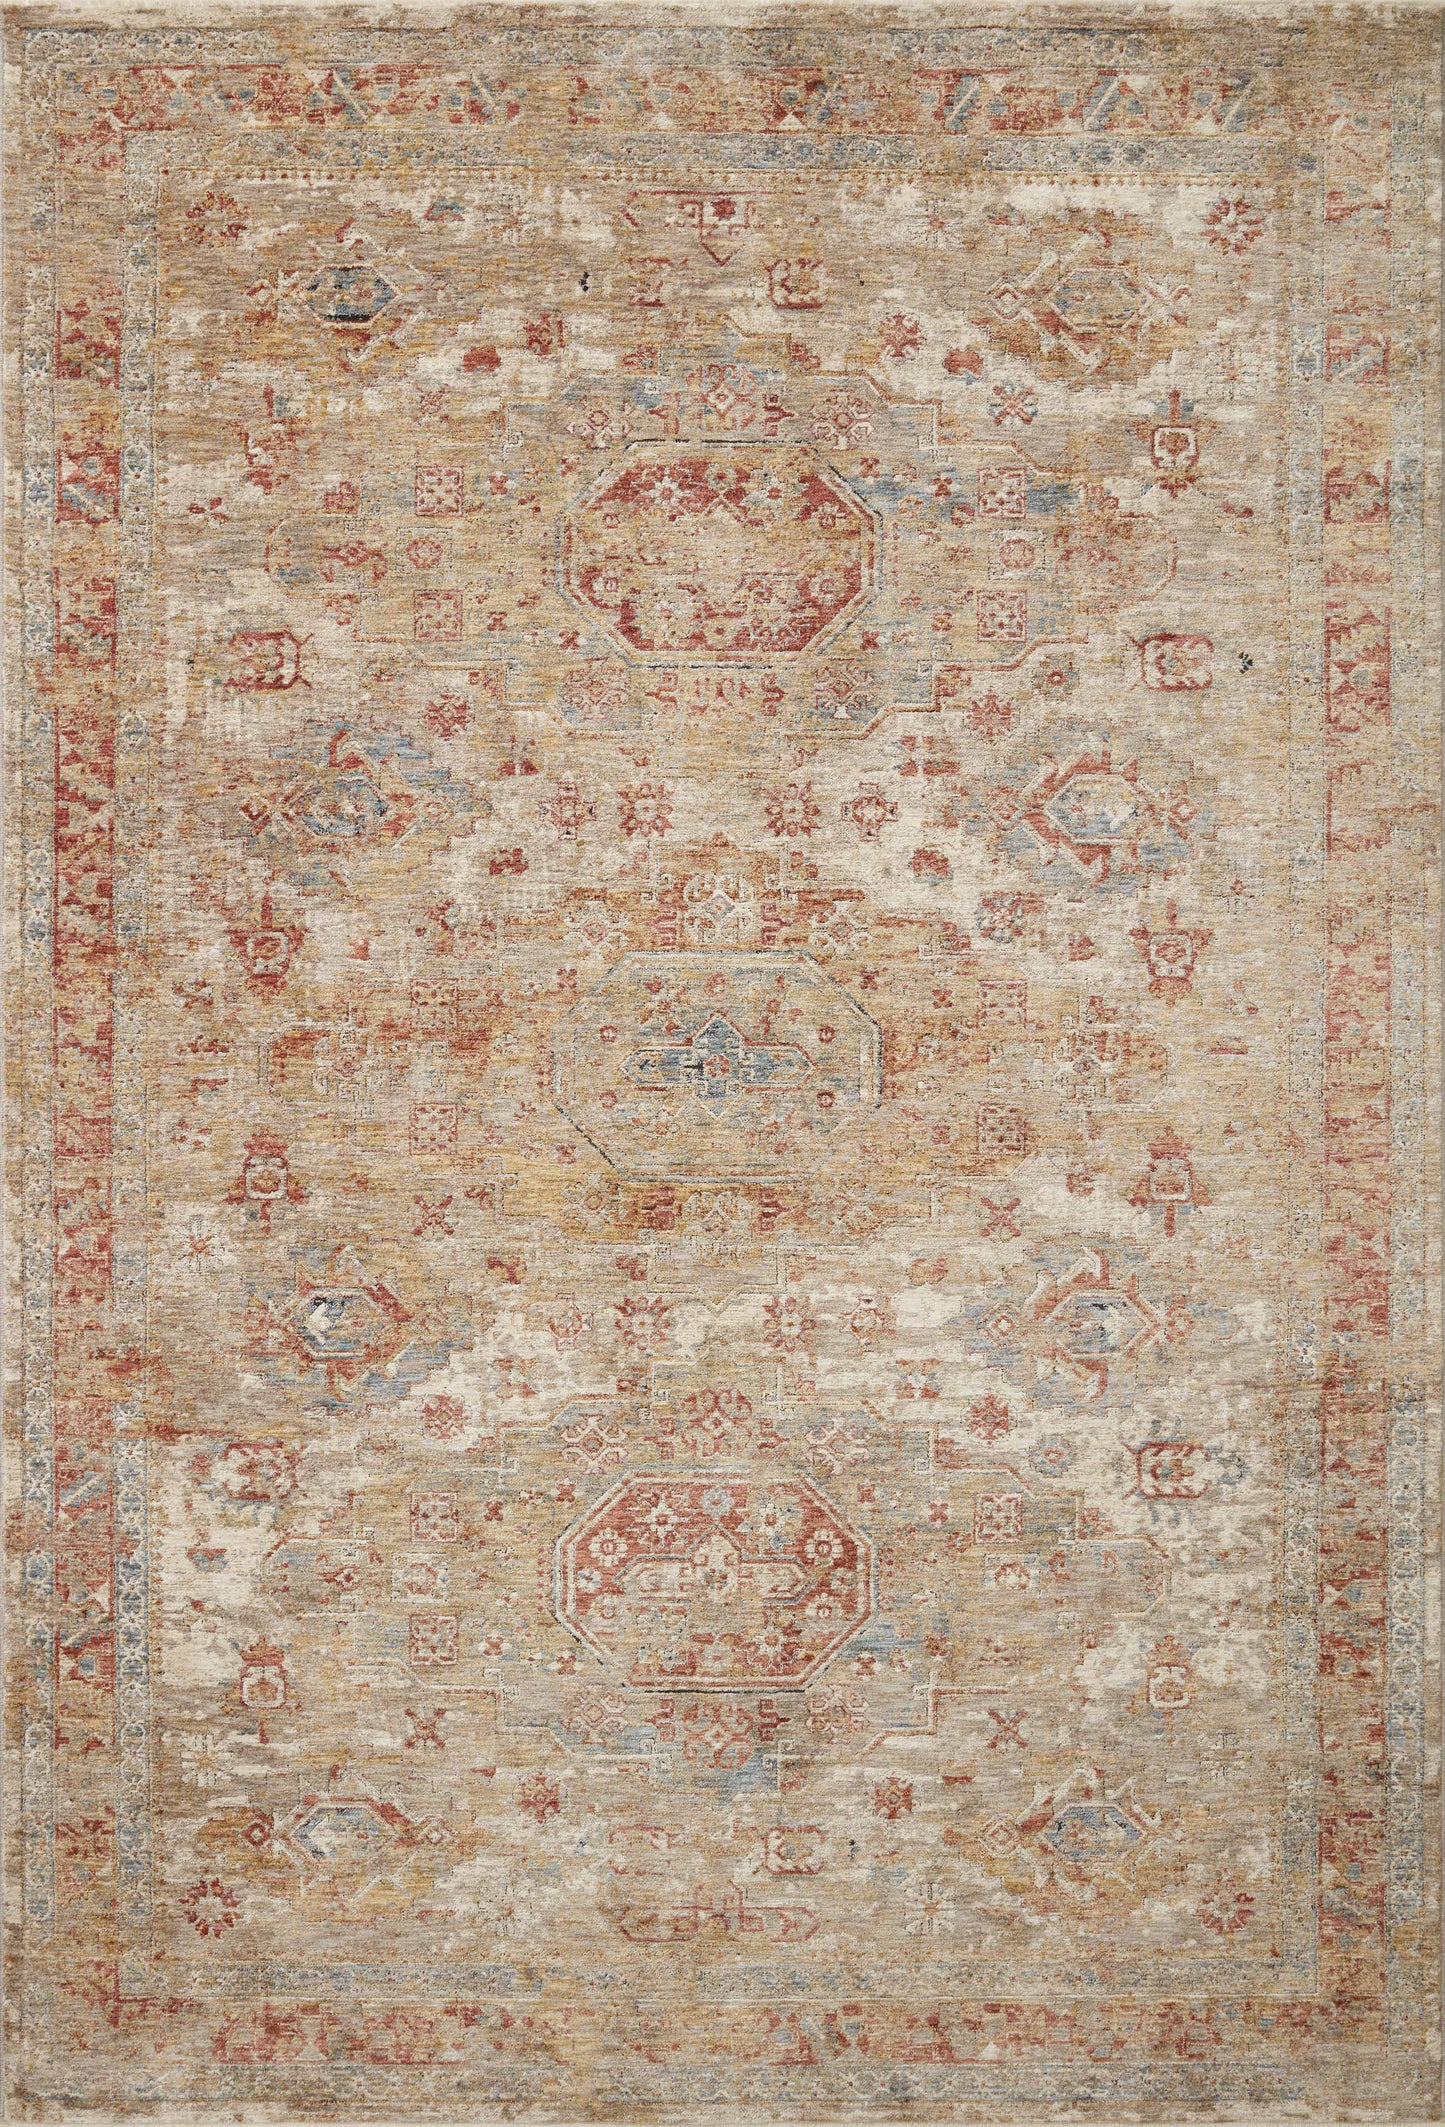 A picture of Loloi's Gaia rug, in style GAA-02, color Gold / Taupe